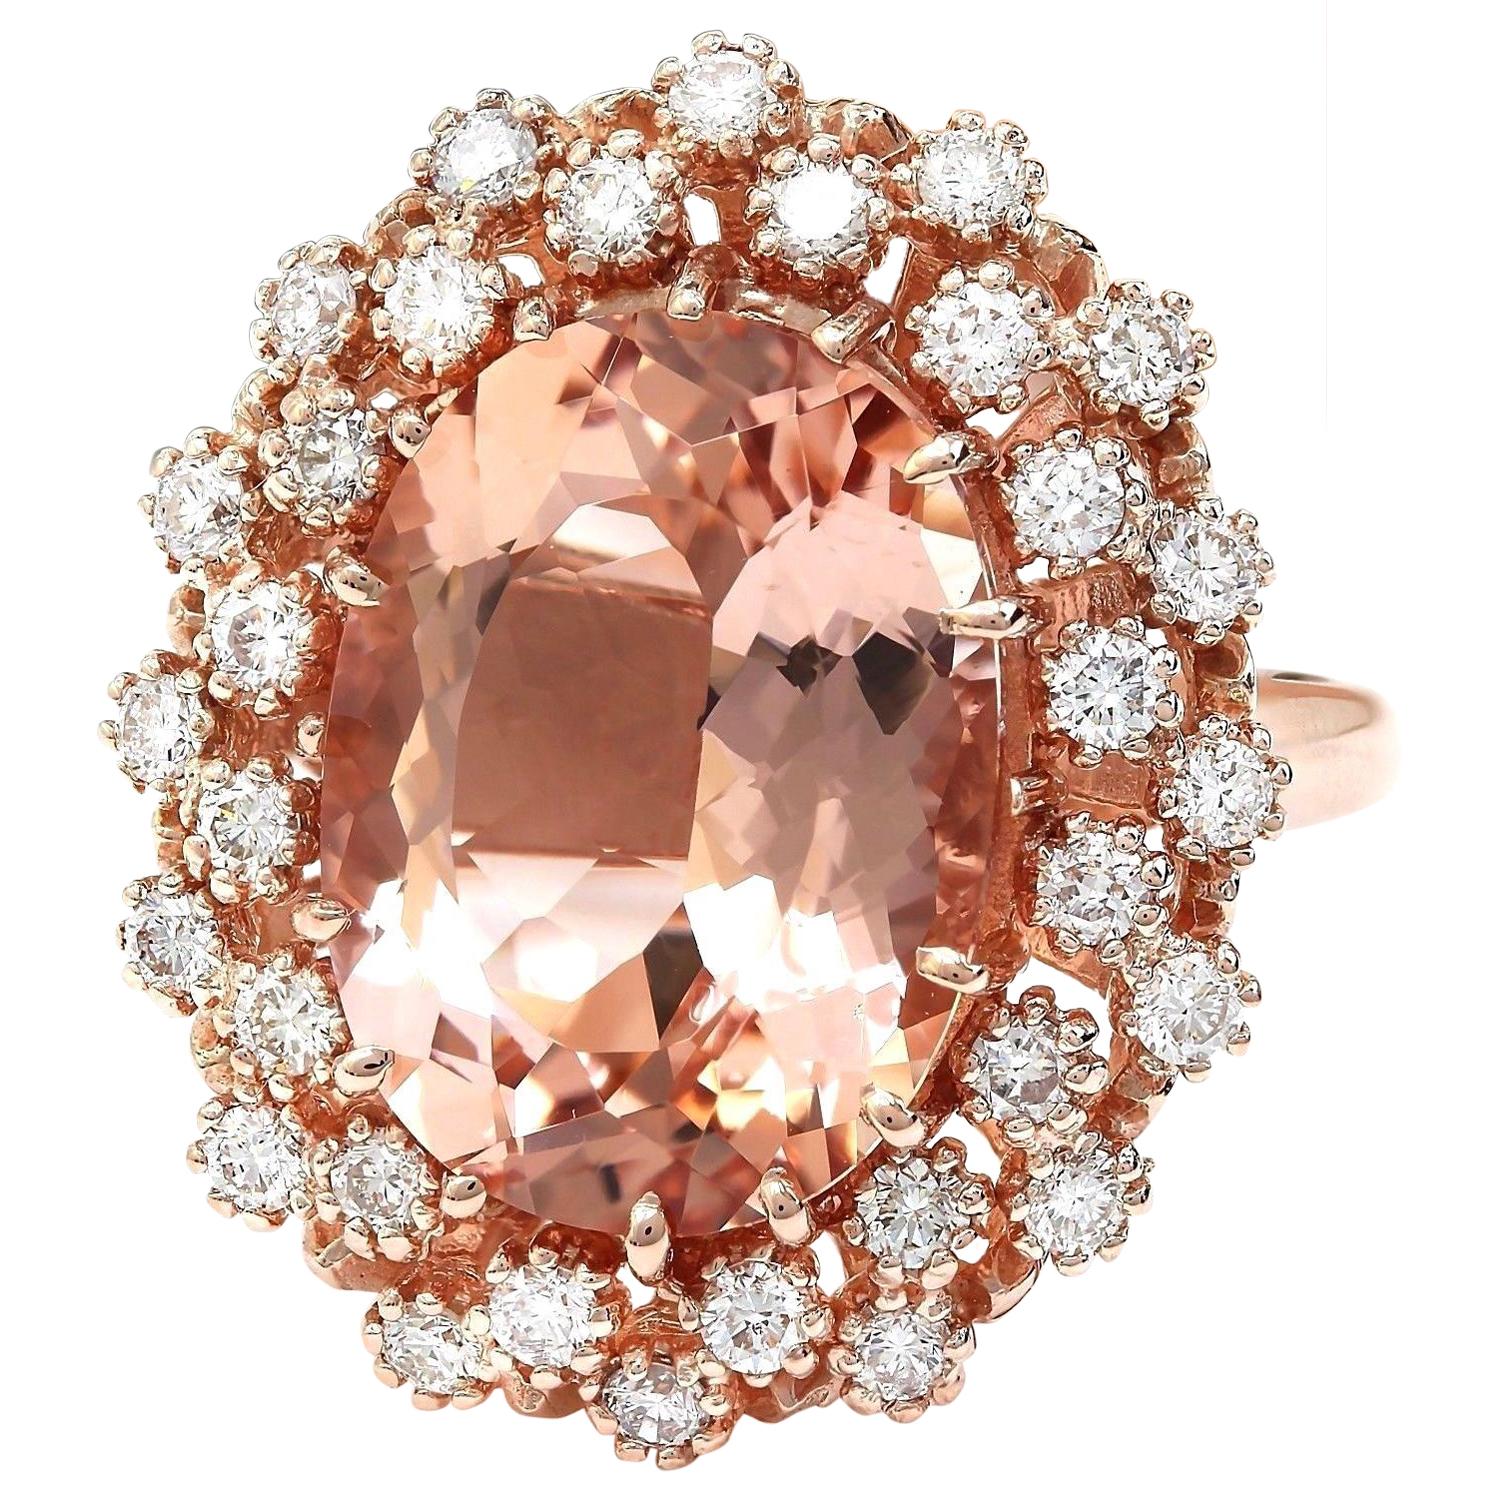 9.99 Carat Natural Morganite 14K Solid Rose Gold Diamond Ring
 Item Type: Ring
 Item Style: Cocktail
 Material: 14K Rose Gold
 Mainstone: Morganite
 Stone Color: Peach
 Stone Weight: 8.99 Carat
 Stone Shape: Oval
 Stone Quantity: 1
 Stone